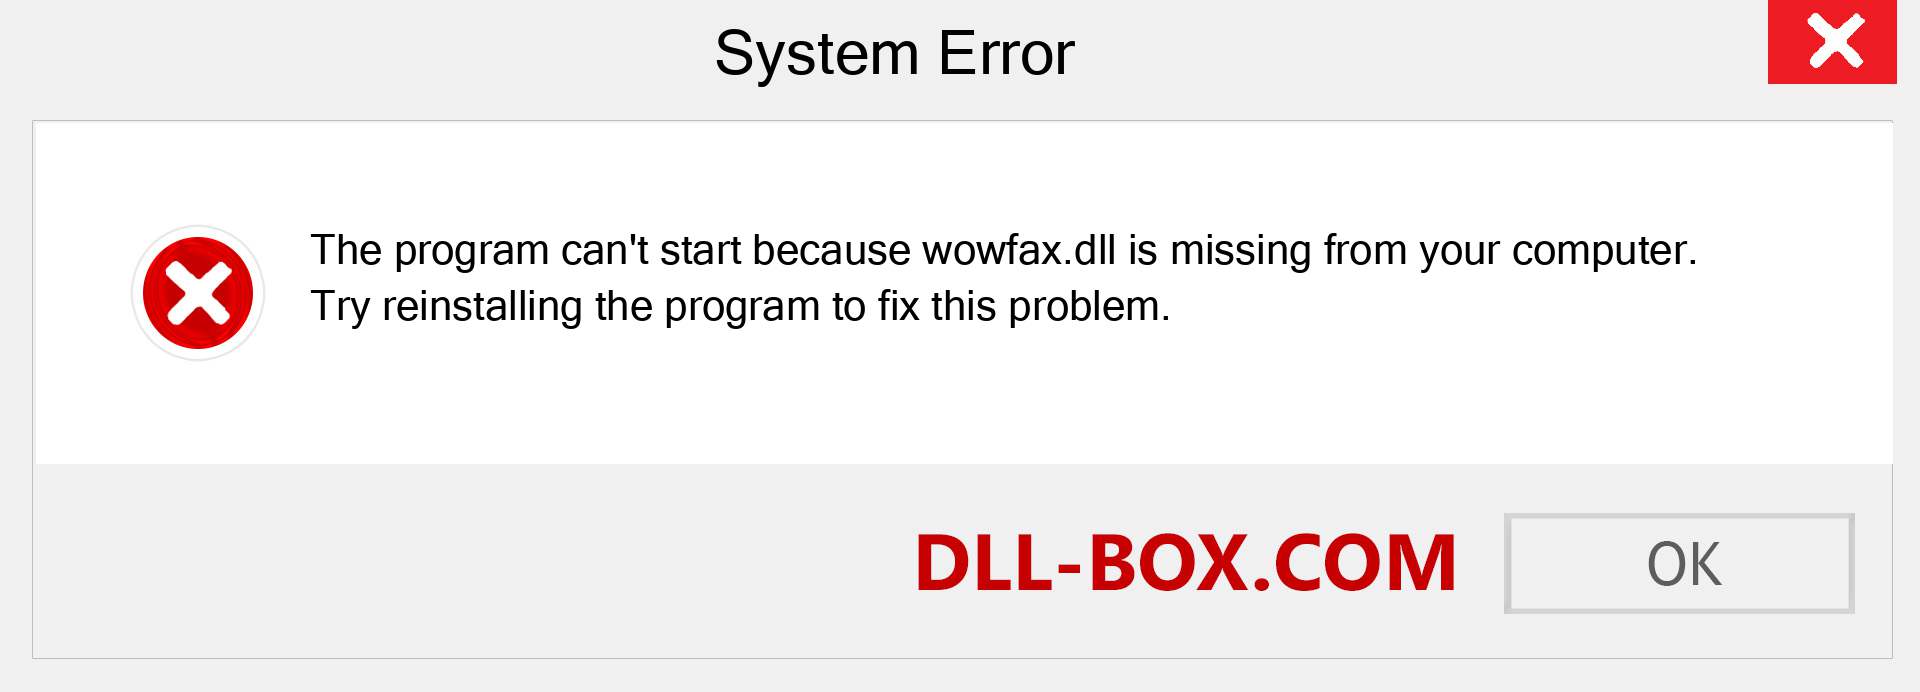  wowfax.dll file is missing?. Download for Windows 7, 8, 10 - Fix  wowfax dll Missing Error on Windows, photos, images